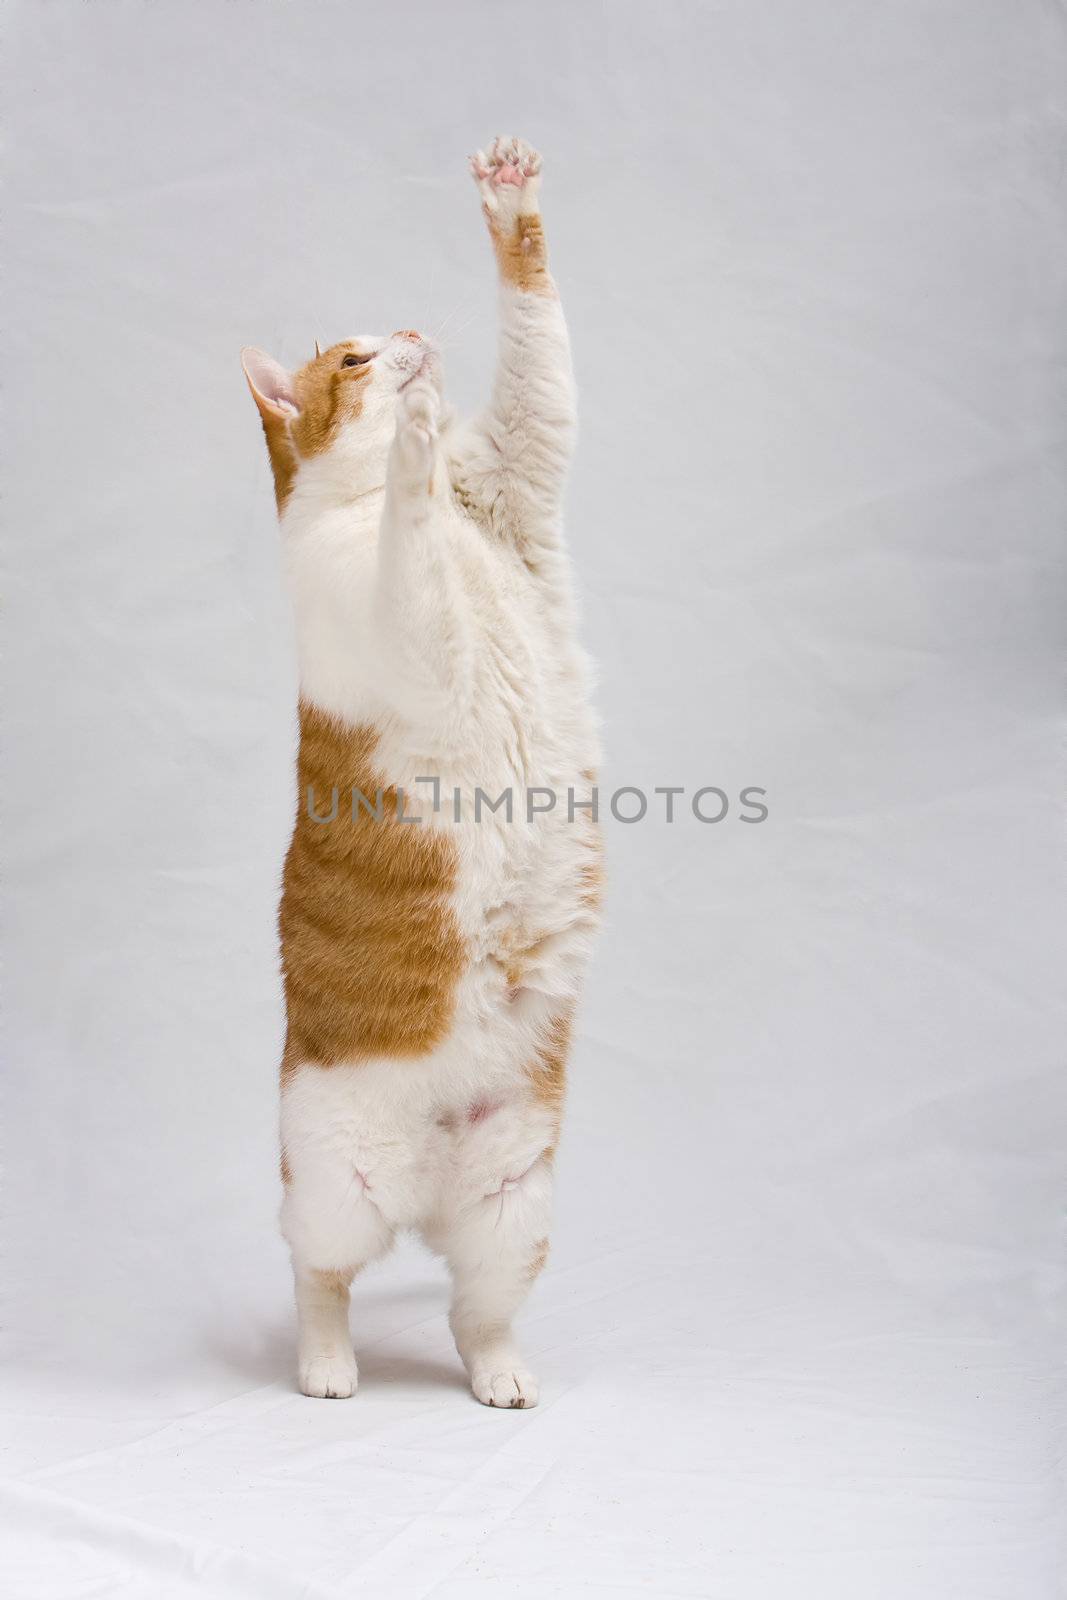 White with orange cat standing and trying to grab something, isolated on white